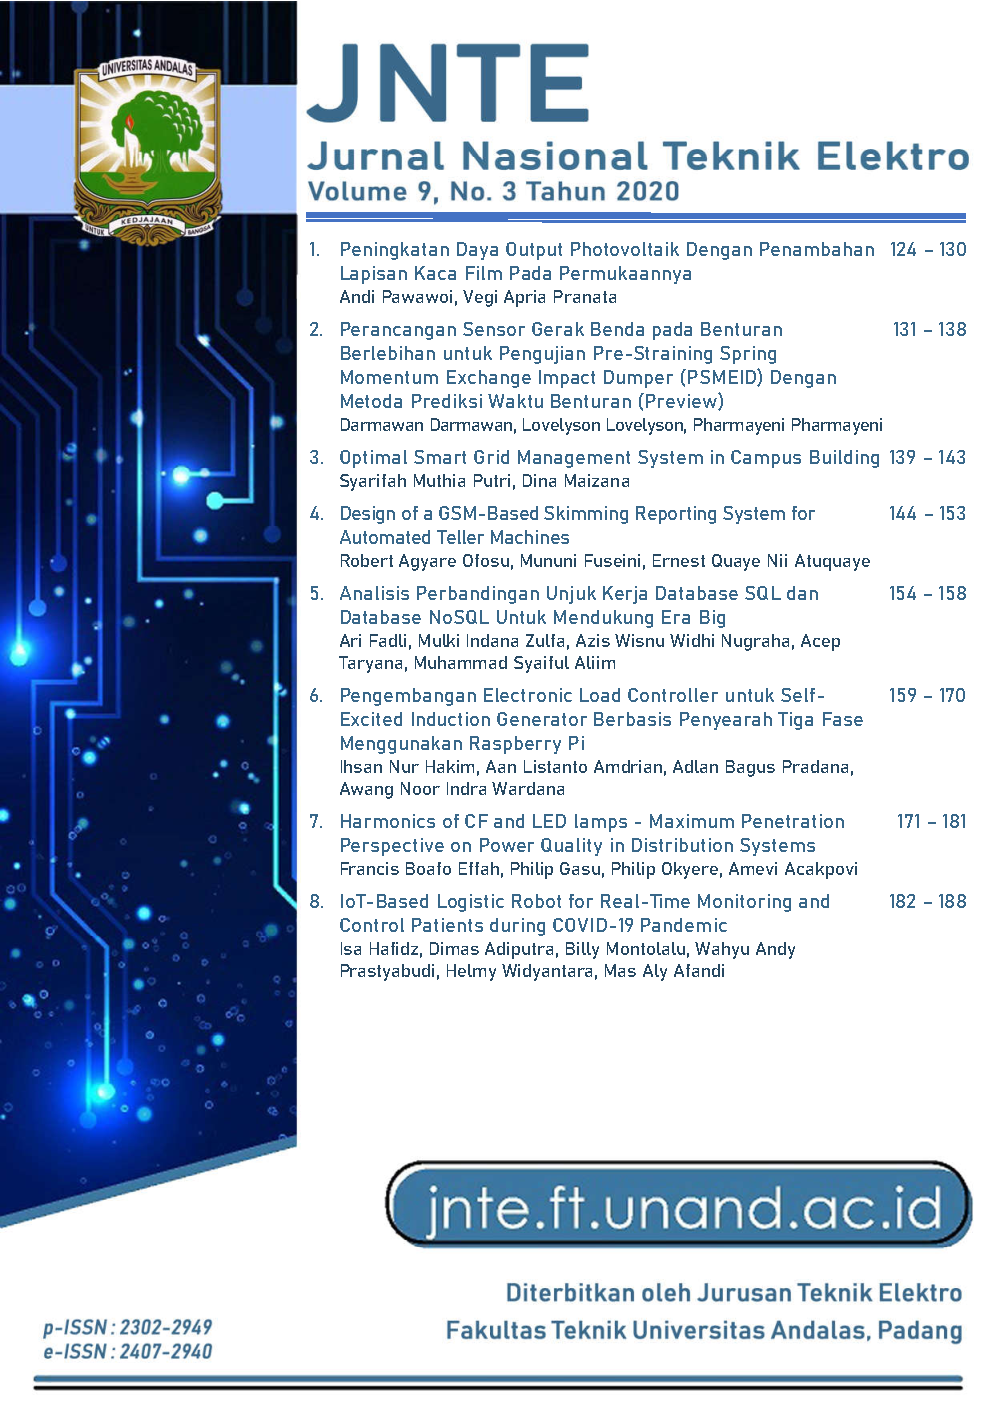 http://jnte.ft.unand.ac.id/public/journals/6/cover_issue_41_en_US.png